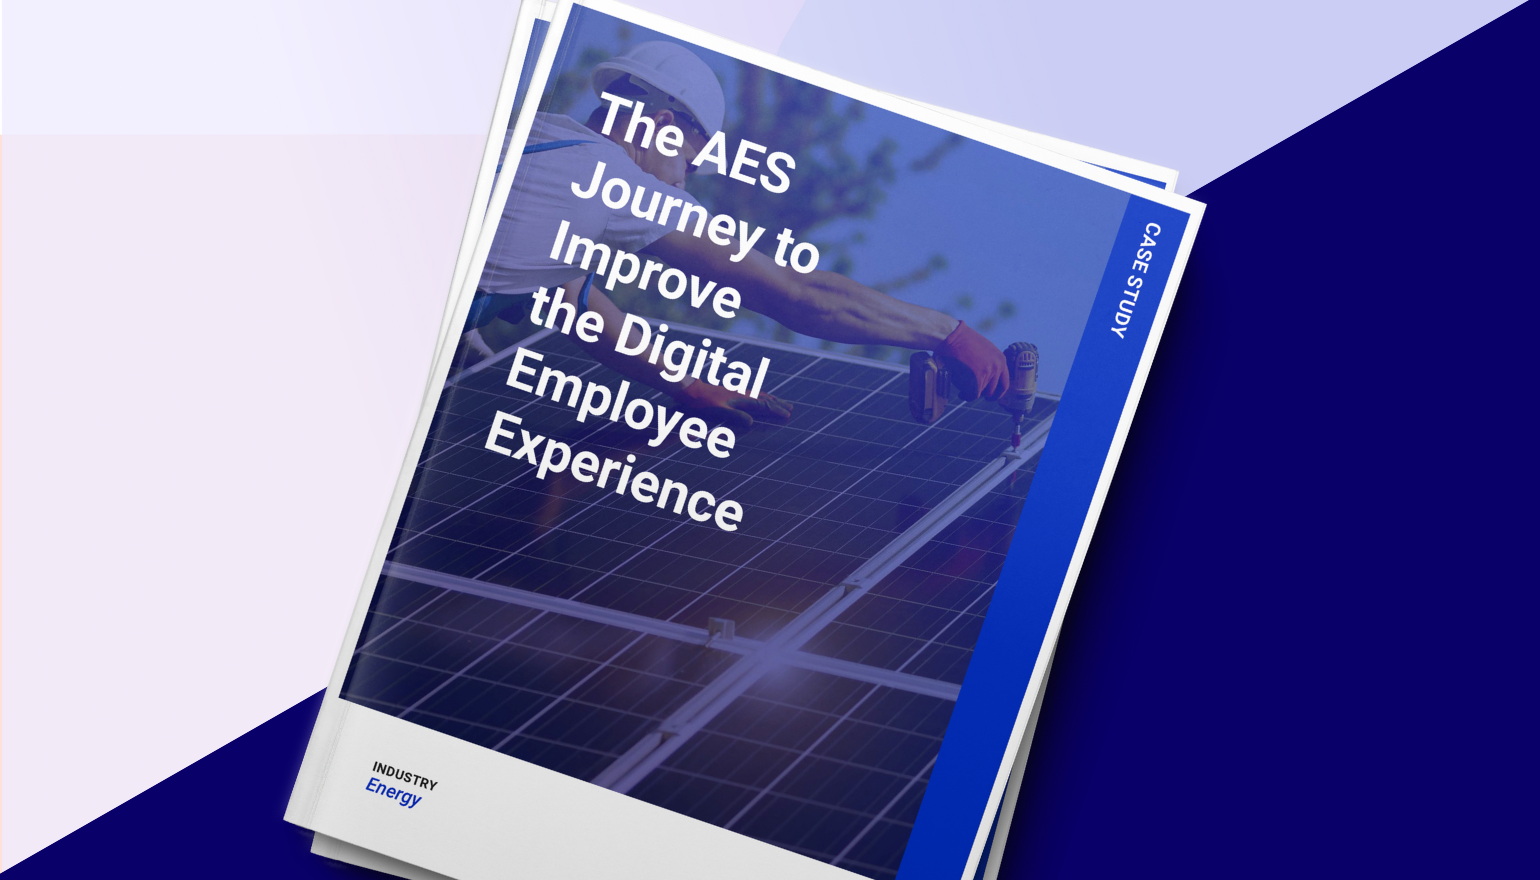 The AES Journey to Improve the Digital Employee Experience